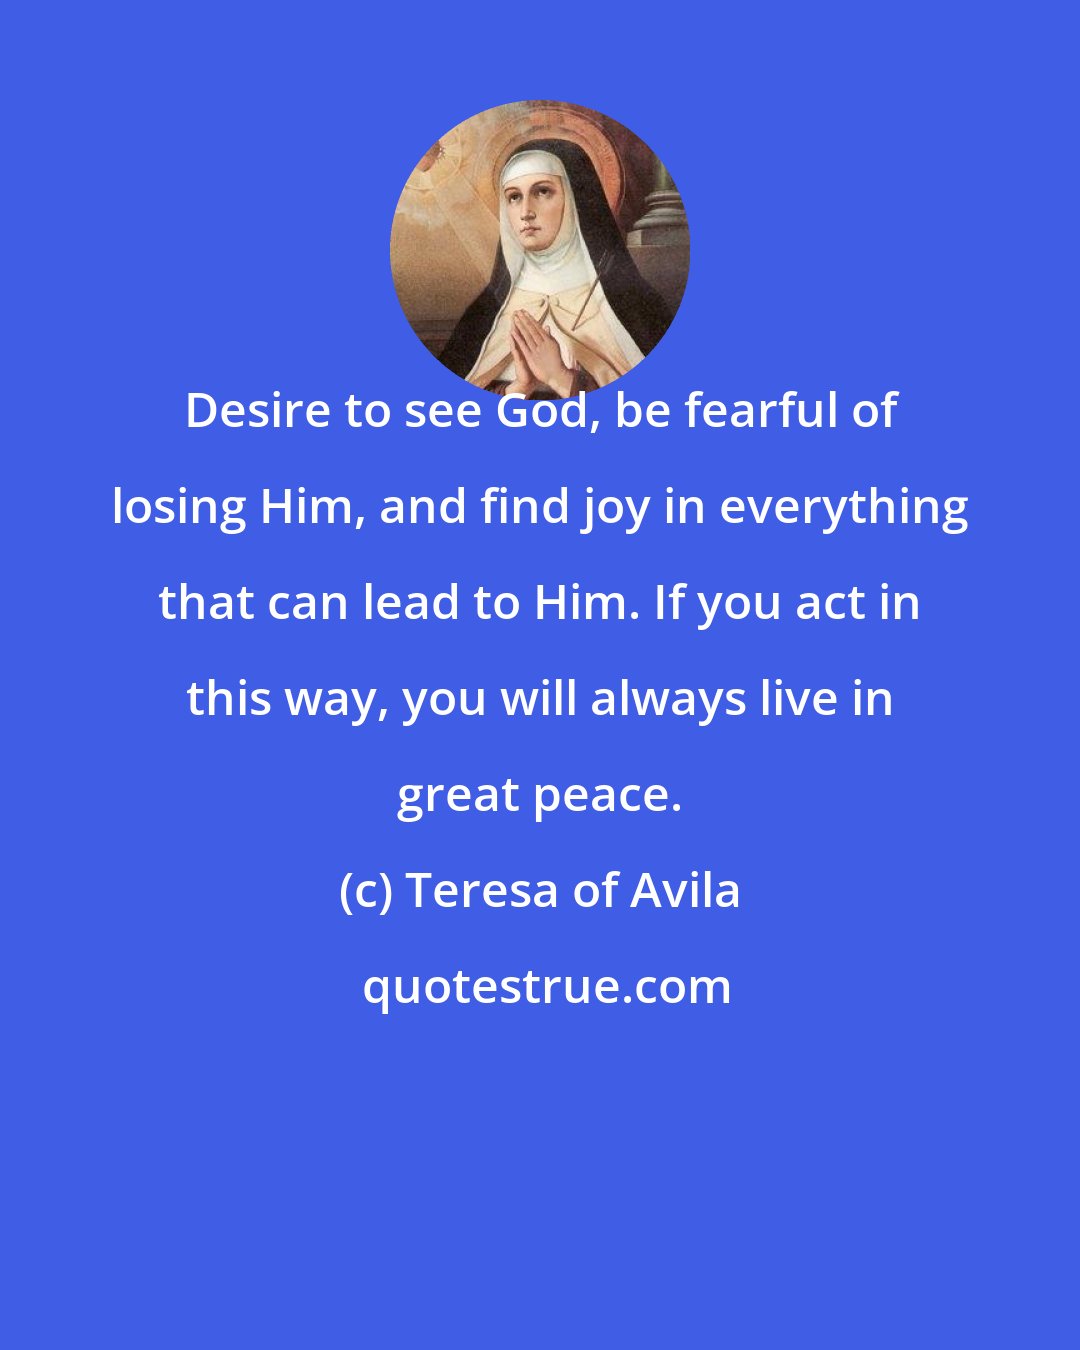 Teresa of Avila: Desire to see God, be fearful of losing Him, and find joy in everything that can lead to Him. If you act in this way, you will always live in great peace.